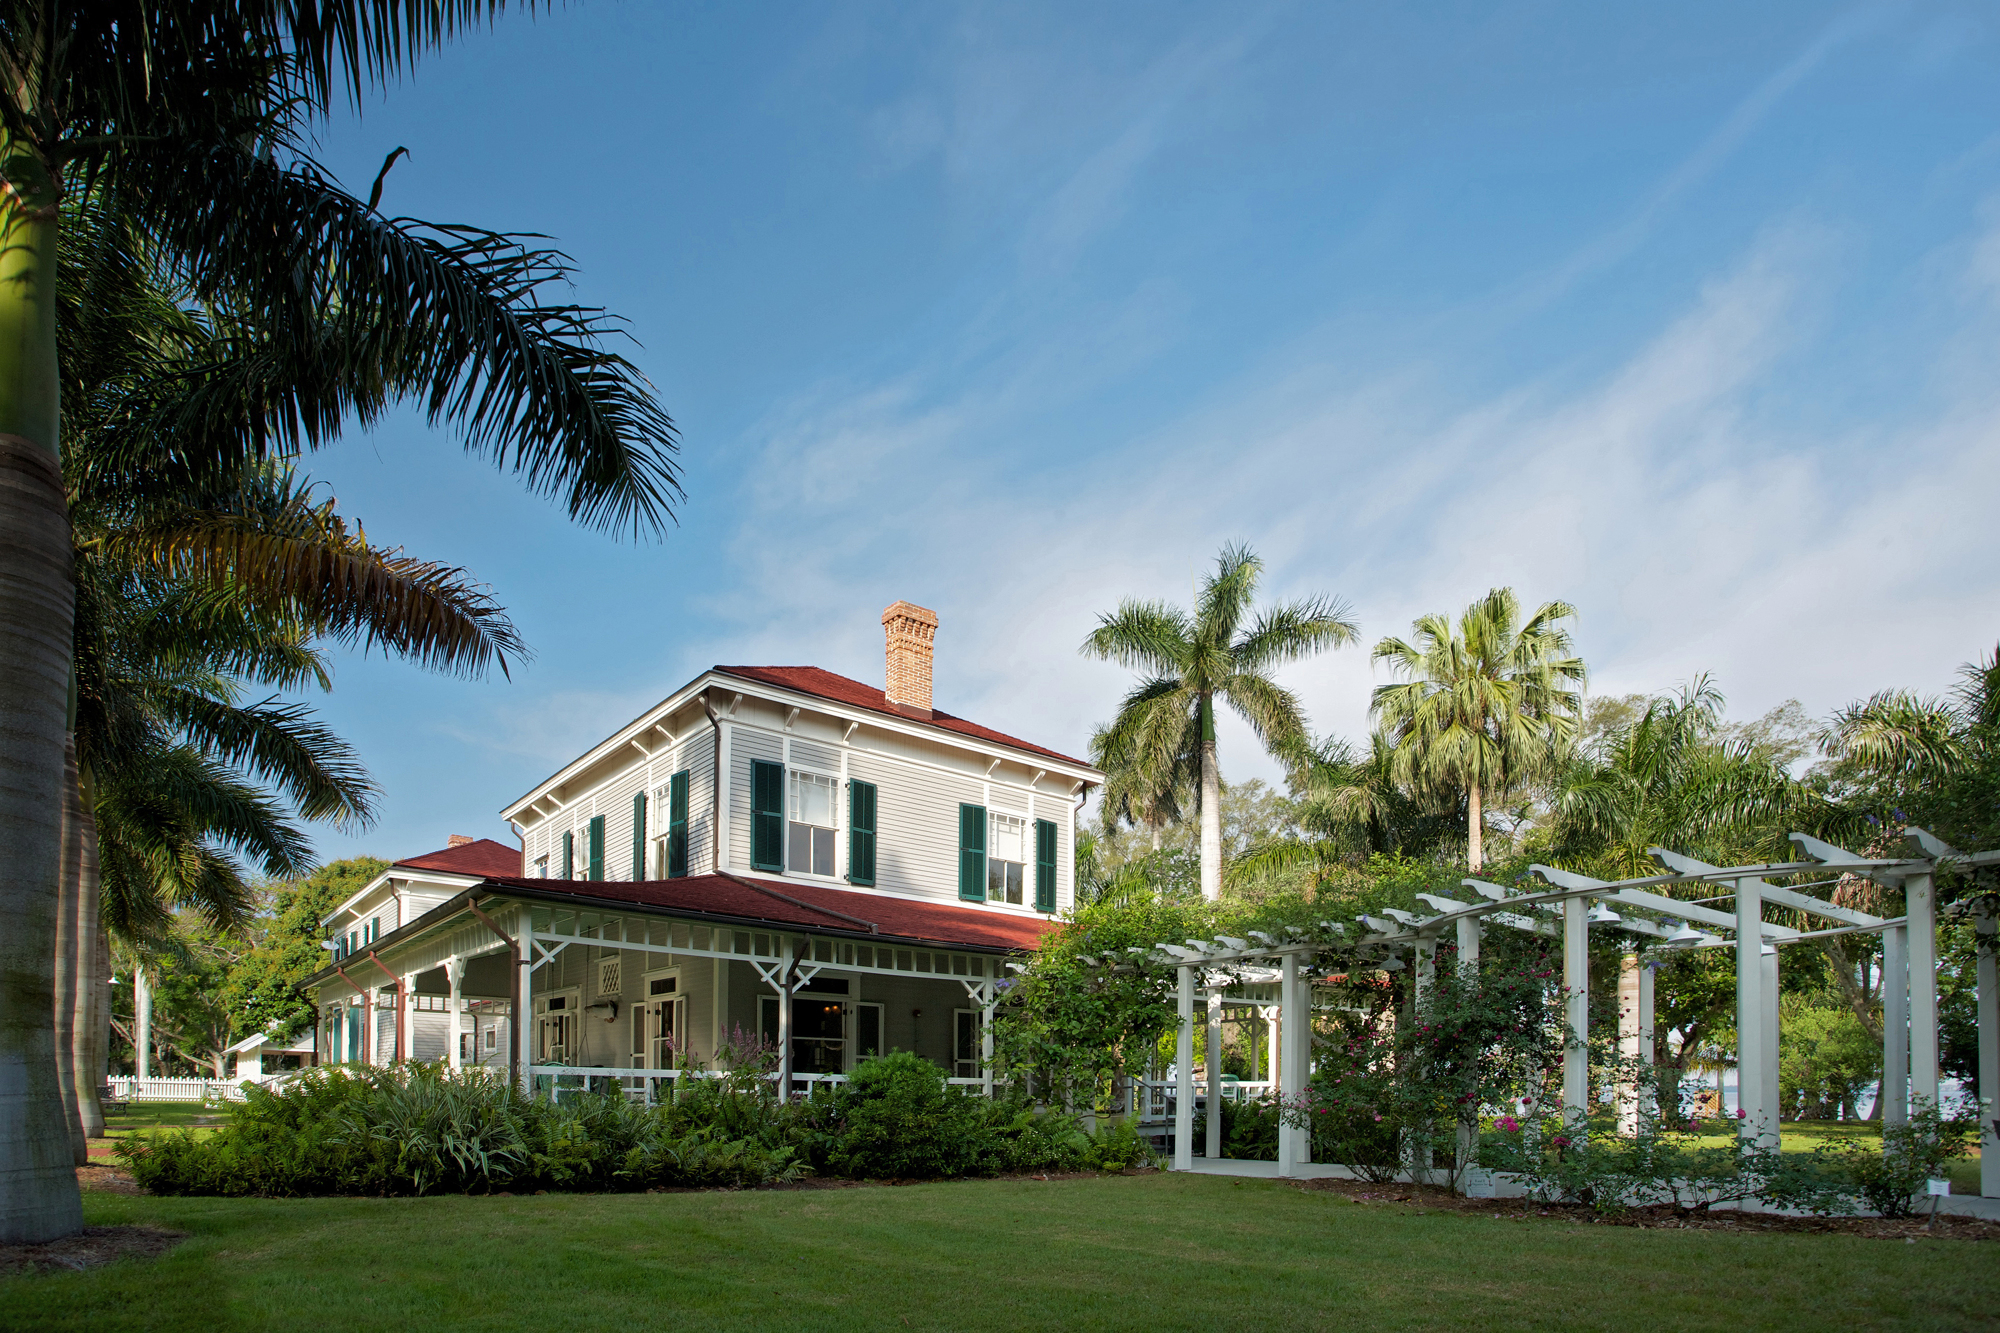 The Edison & Ford Winter Estates is a 20-acre property encompassing a world-class botanical garden, historical museum, laboratory, and the winter homes of two American icons — and buddies — Thomas Edison and Henry Ford. (Courtesy)